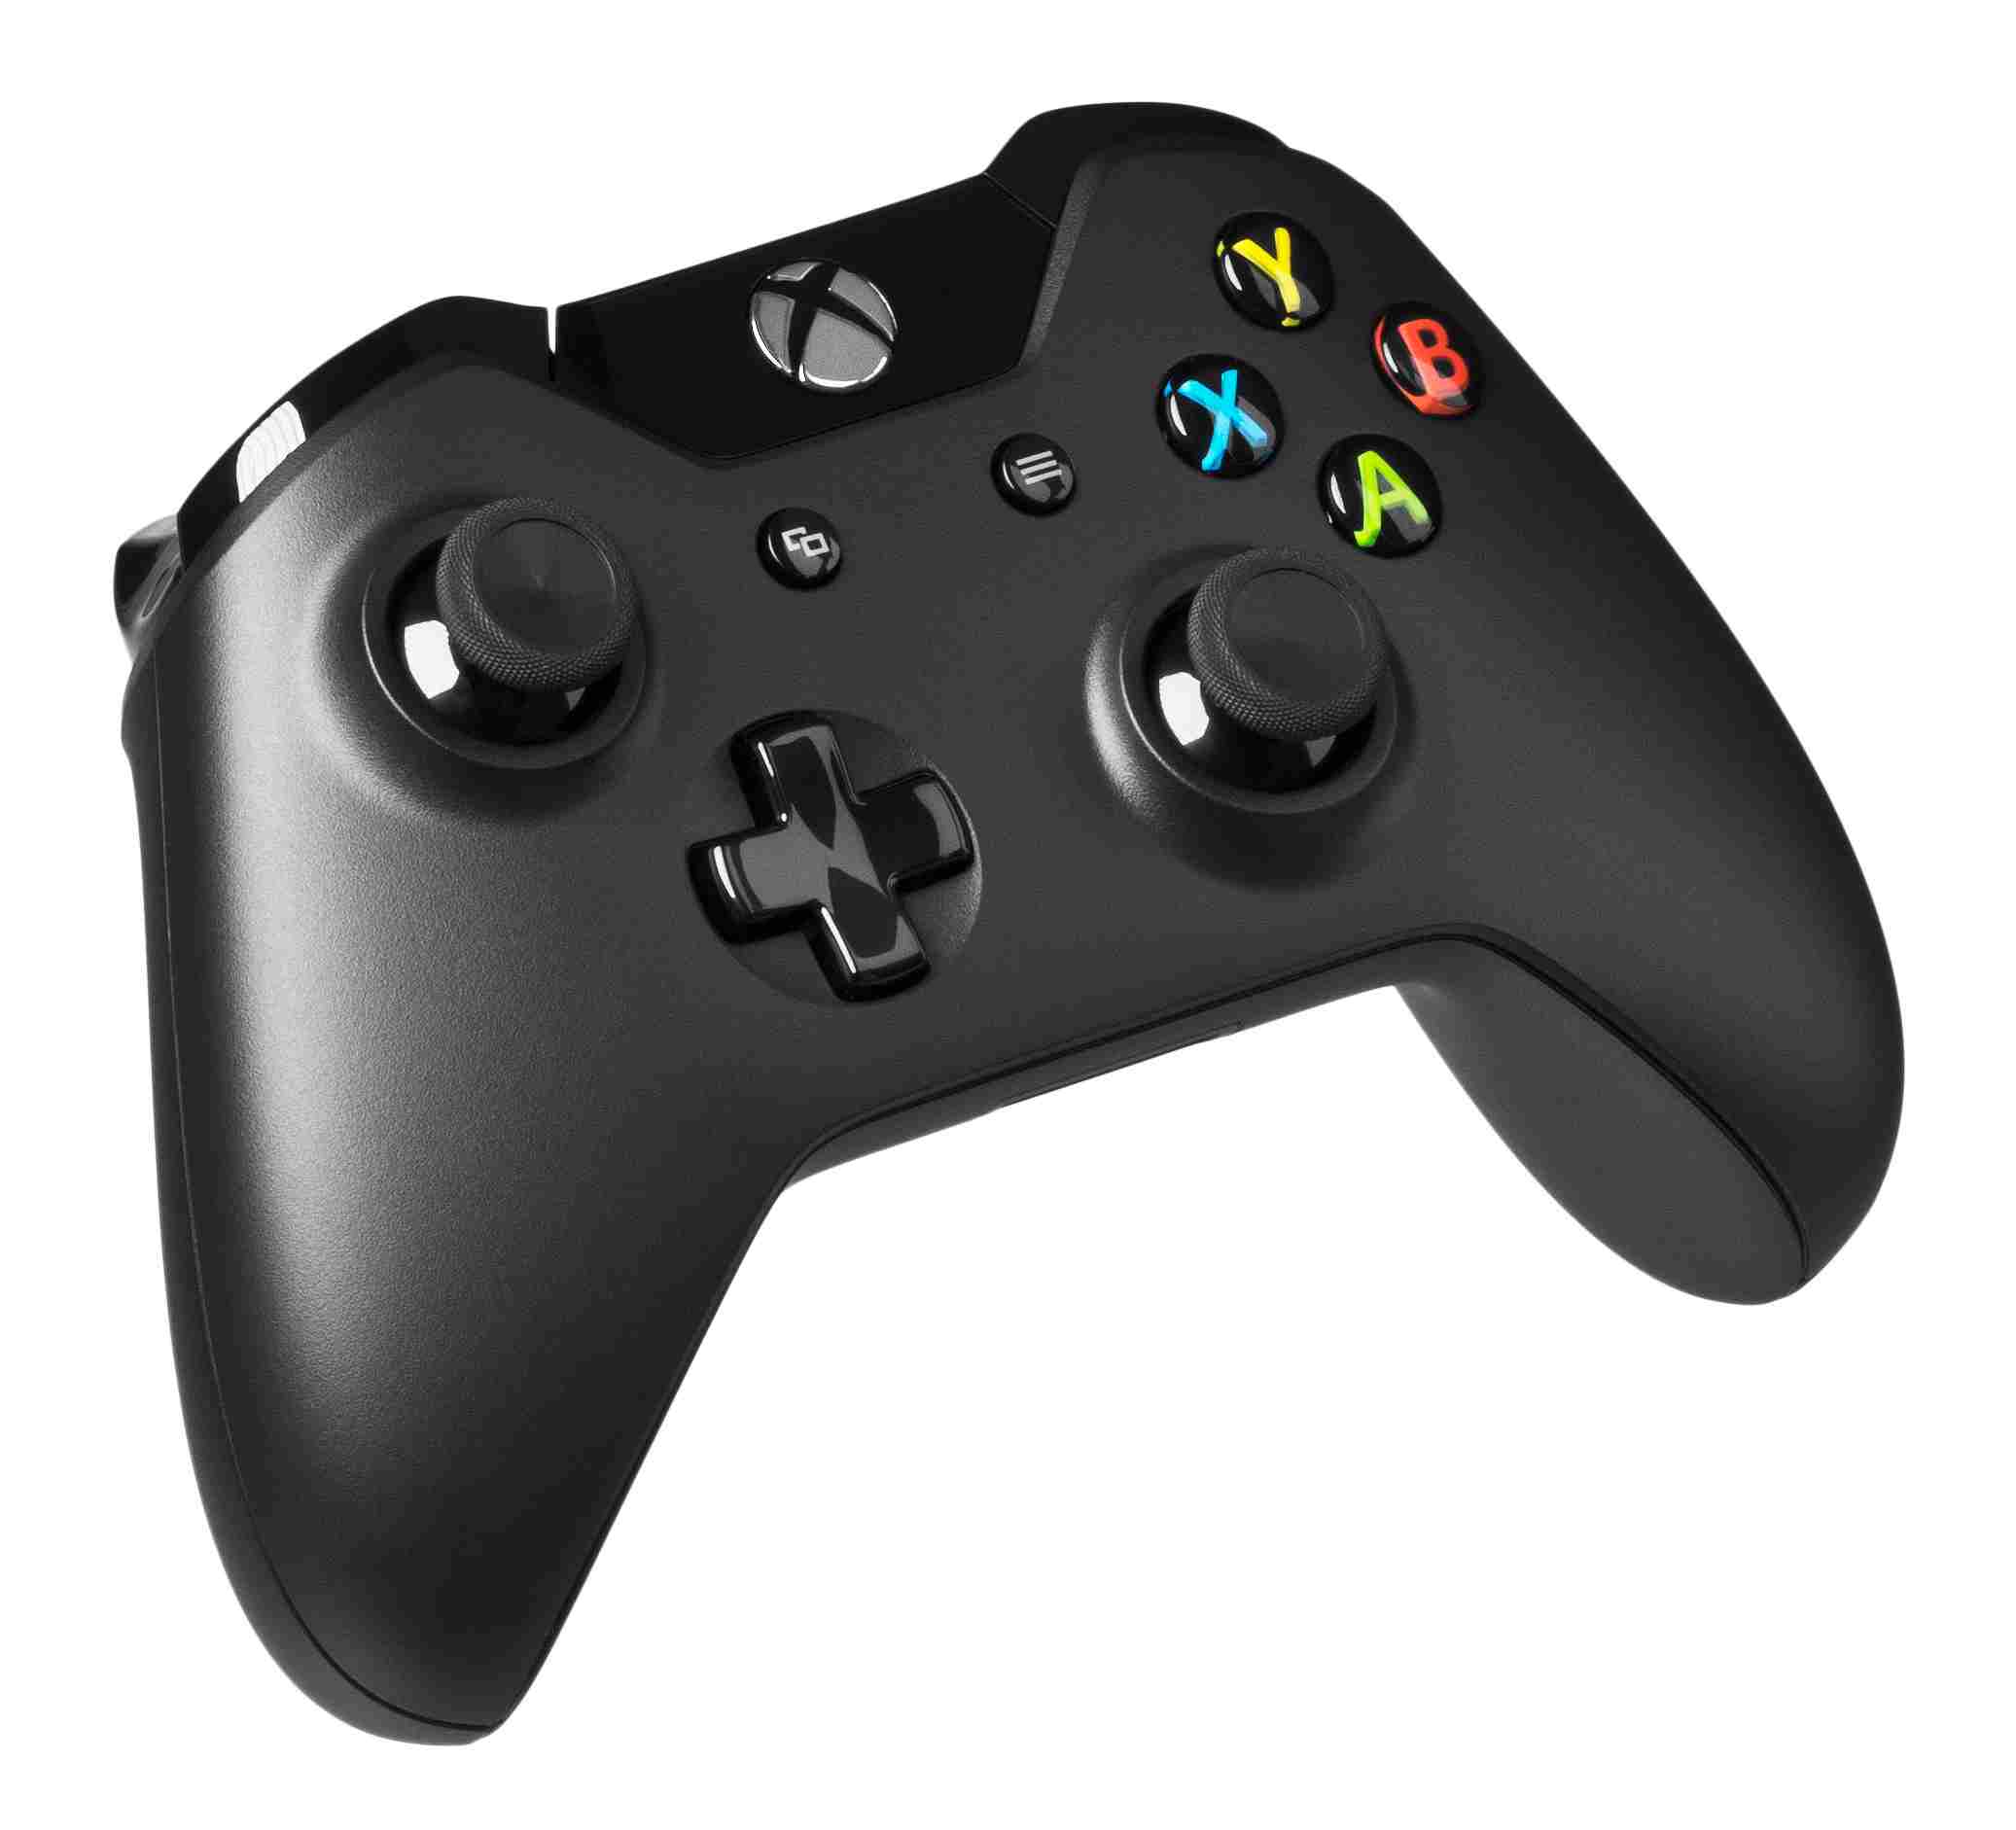 How to turn off Xbox One controller